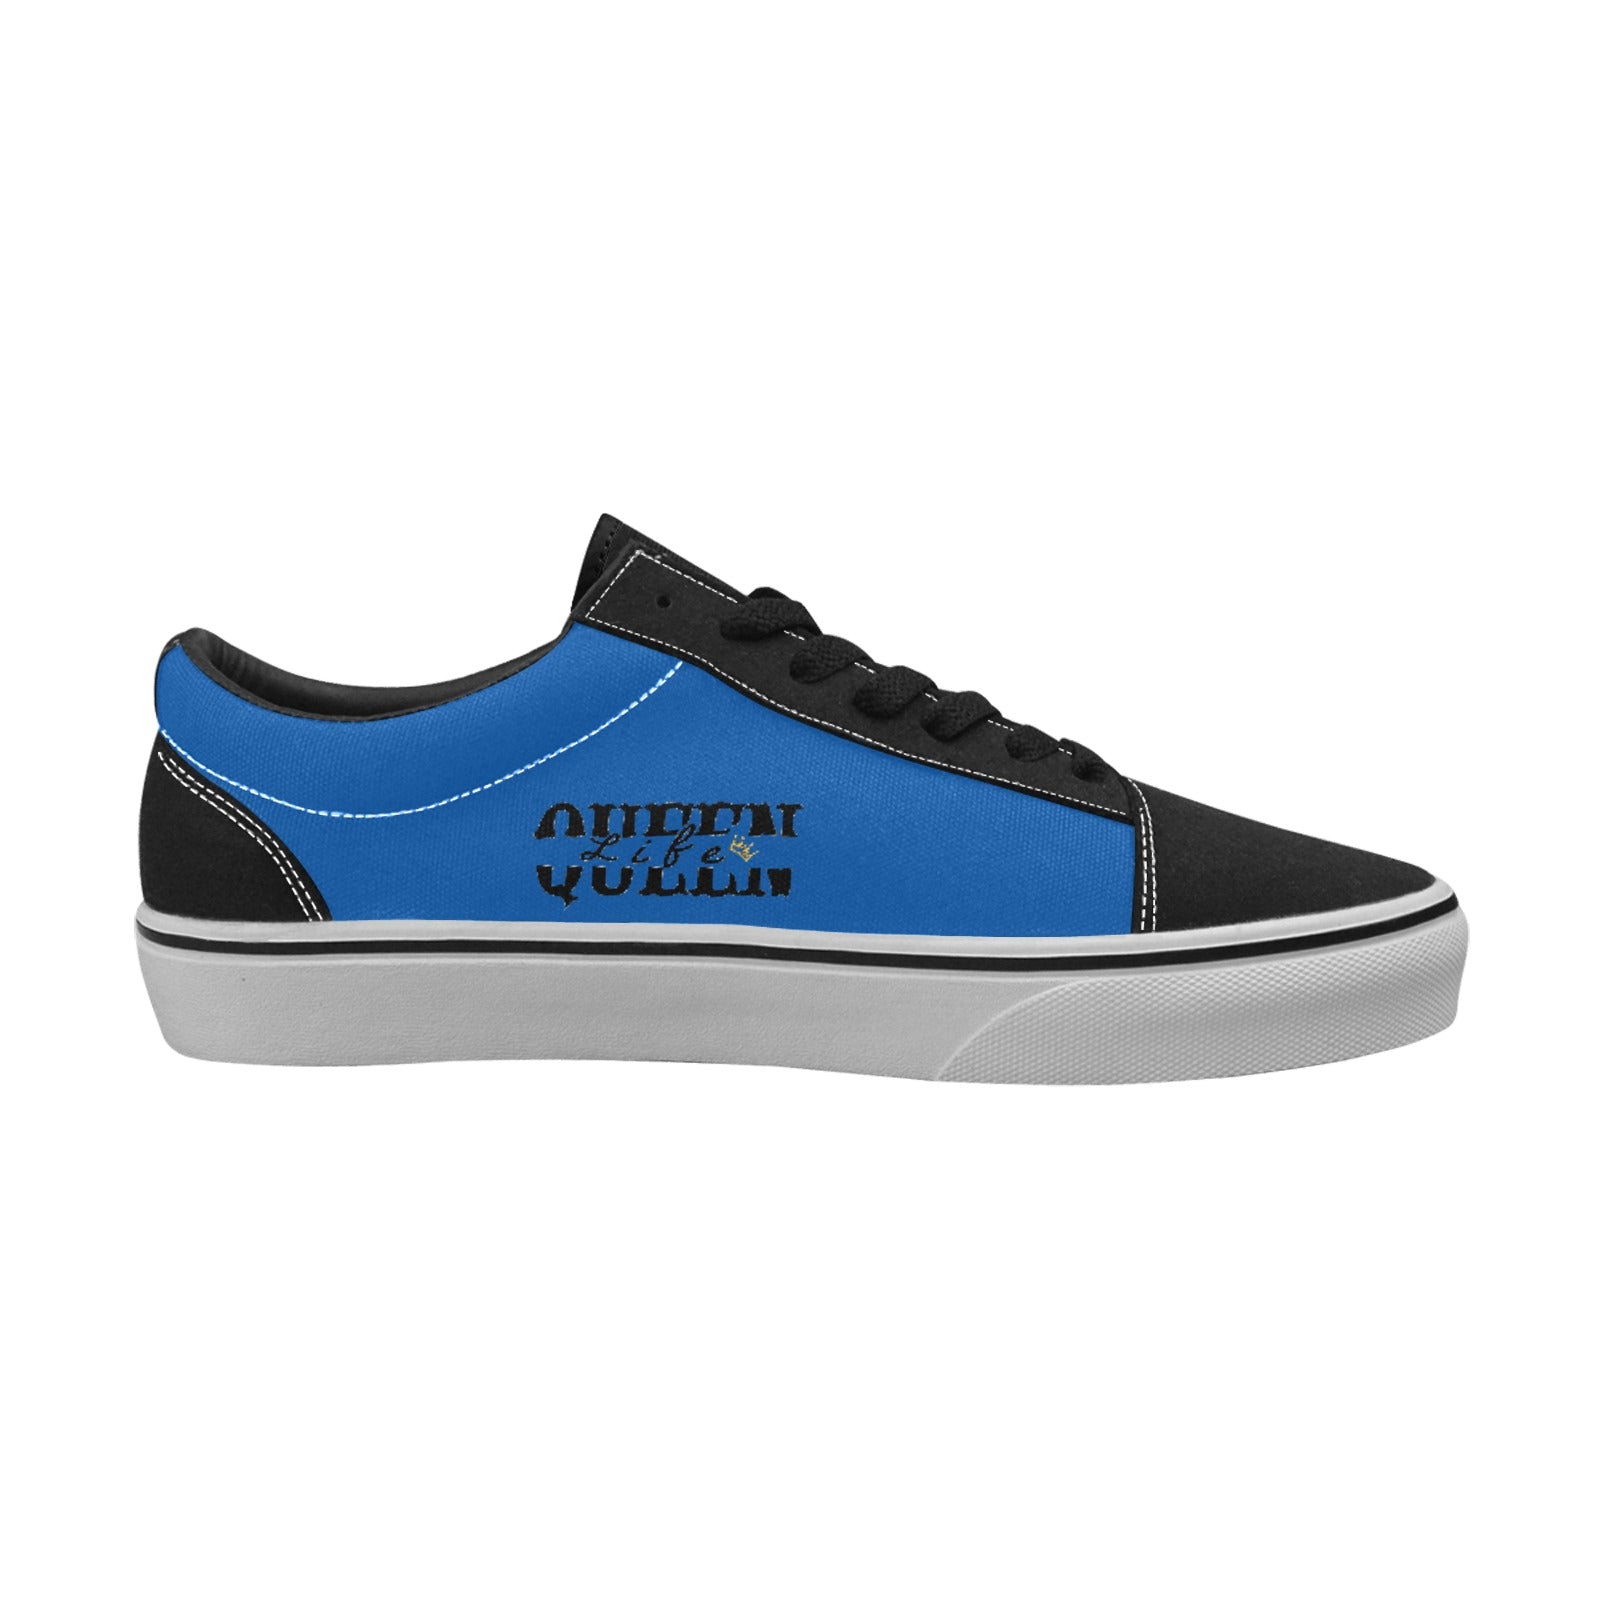 Queen Life Women's Lace-Up Canvas Shoes